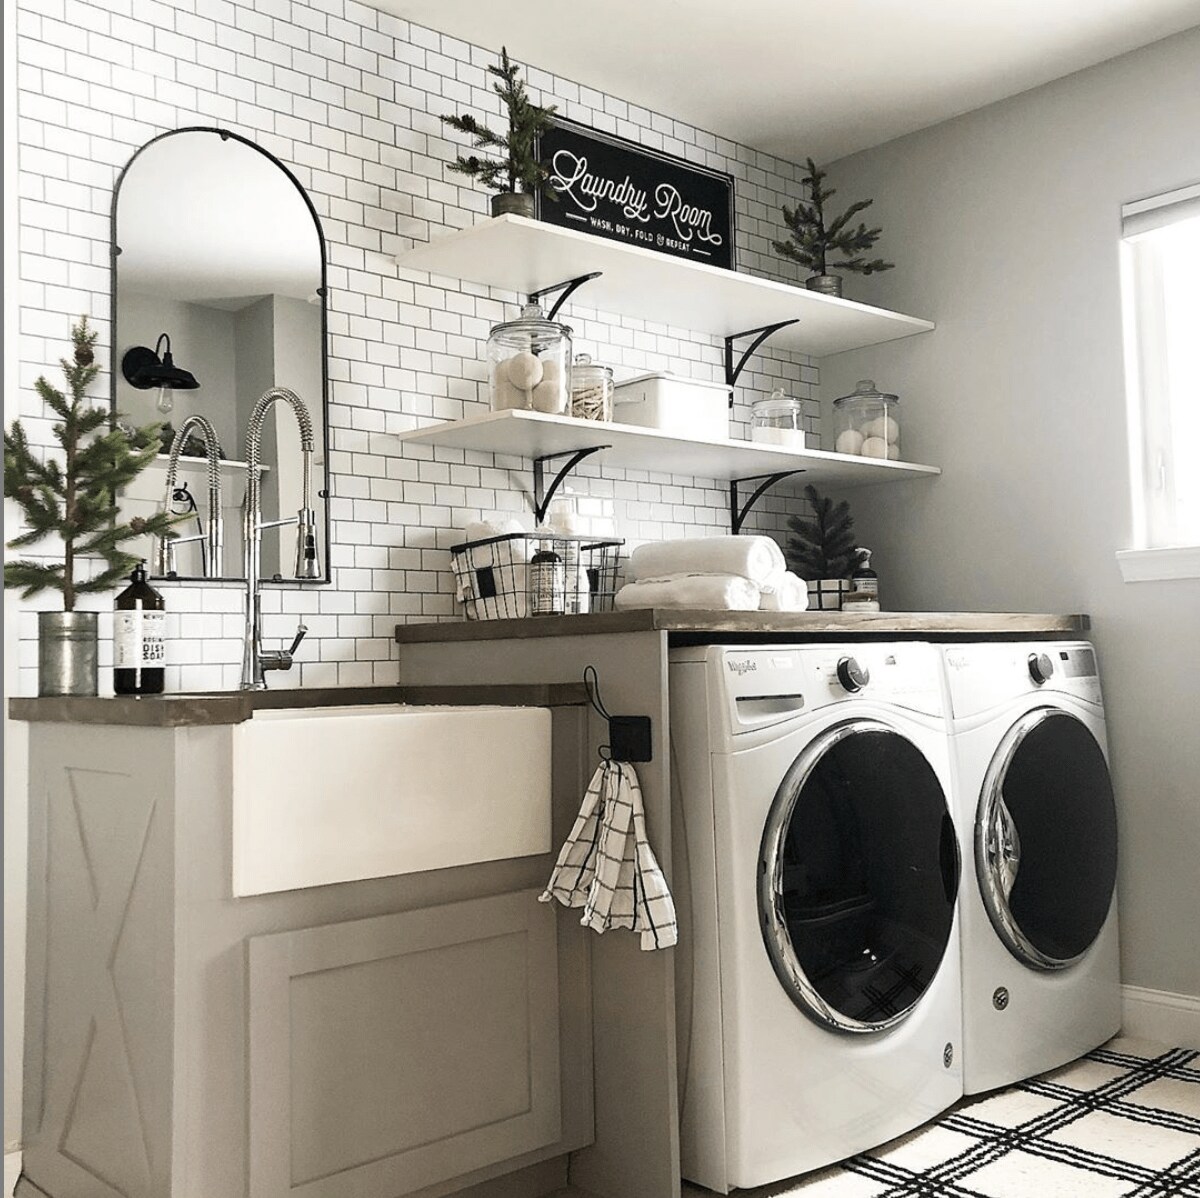 Why Having Sink In Laundry Room